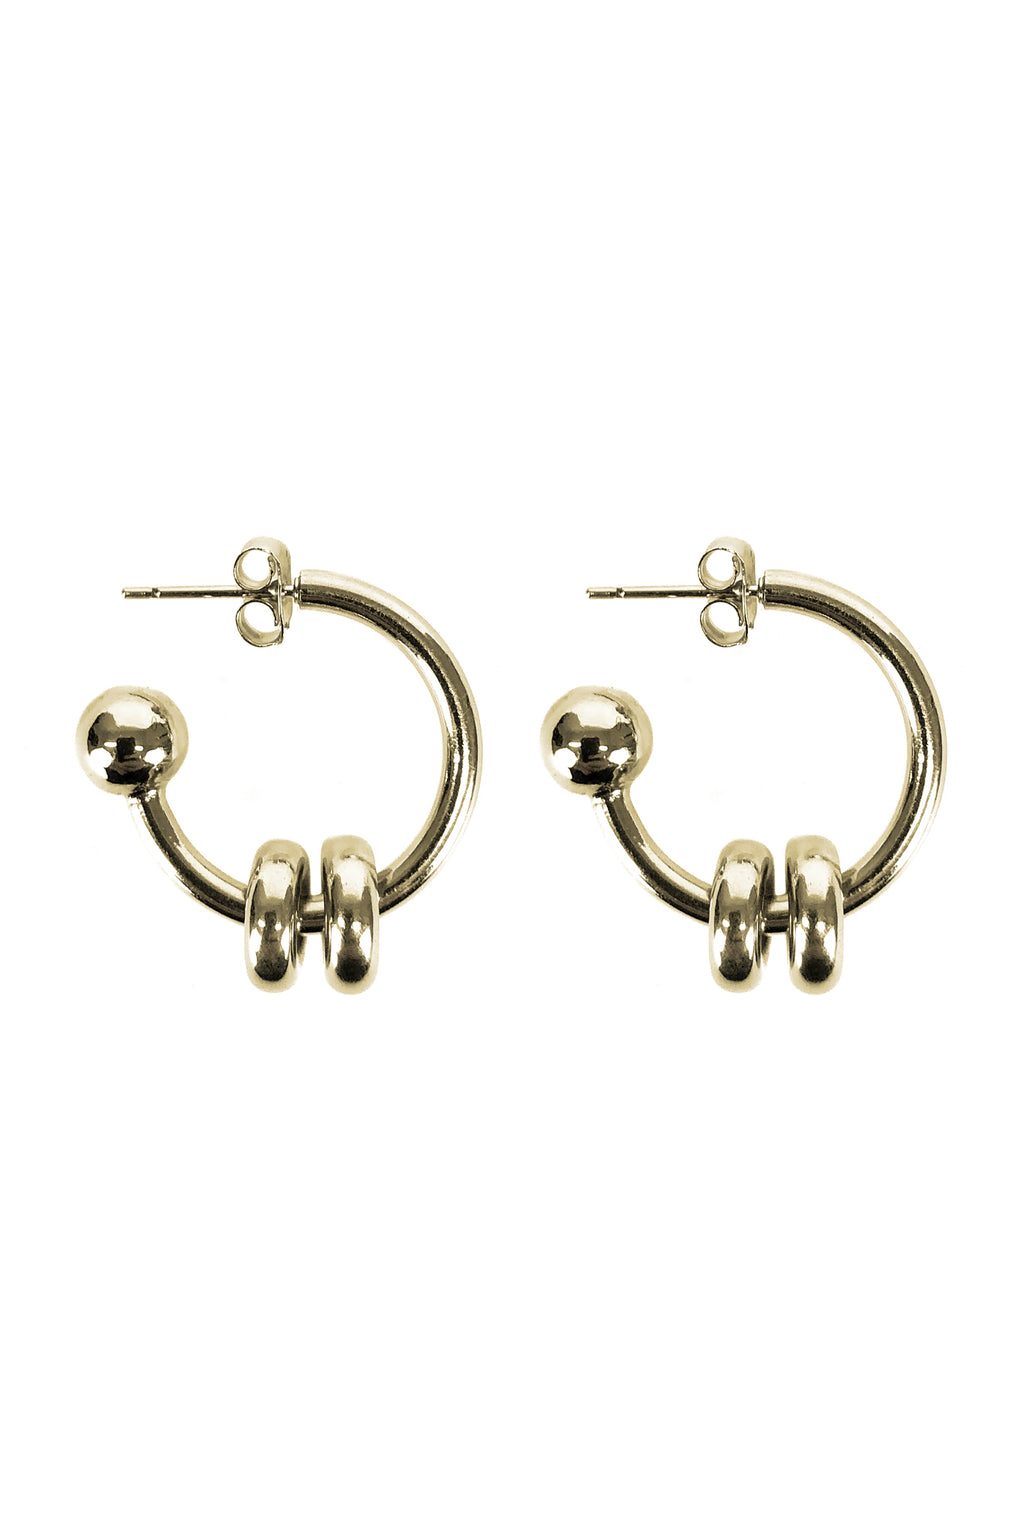 Justine Clenquet Alan Earrings, Gold